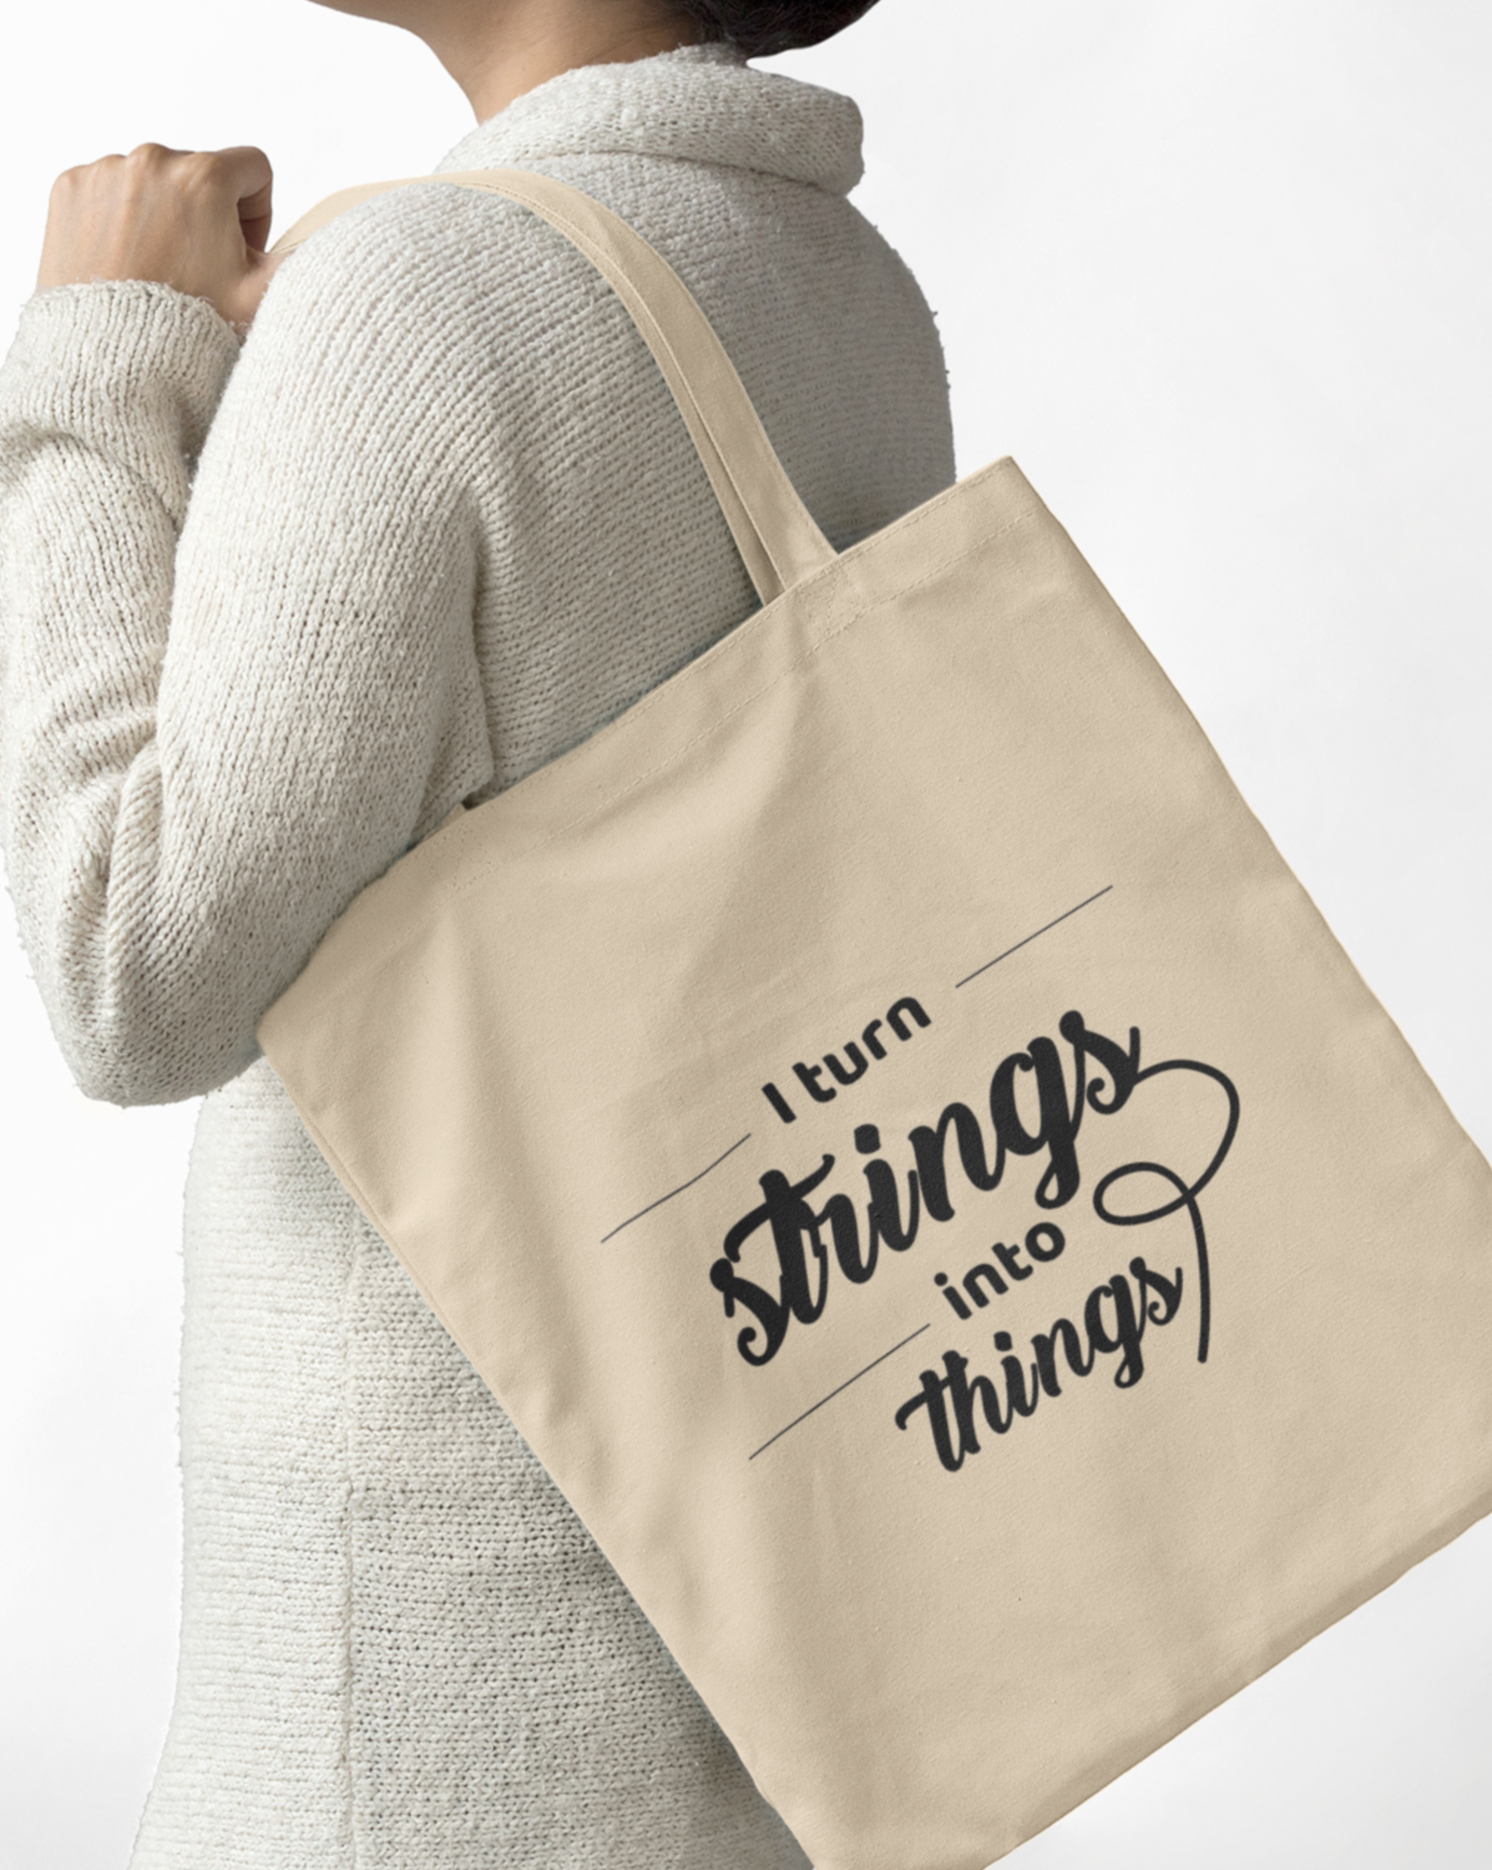 Why we love knitting bags